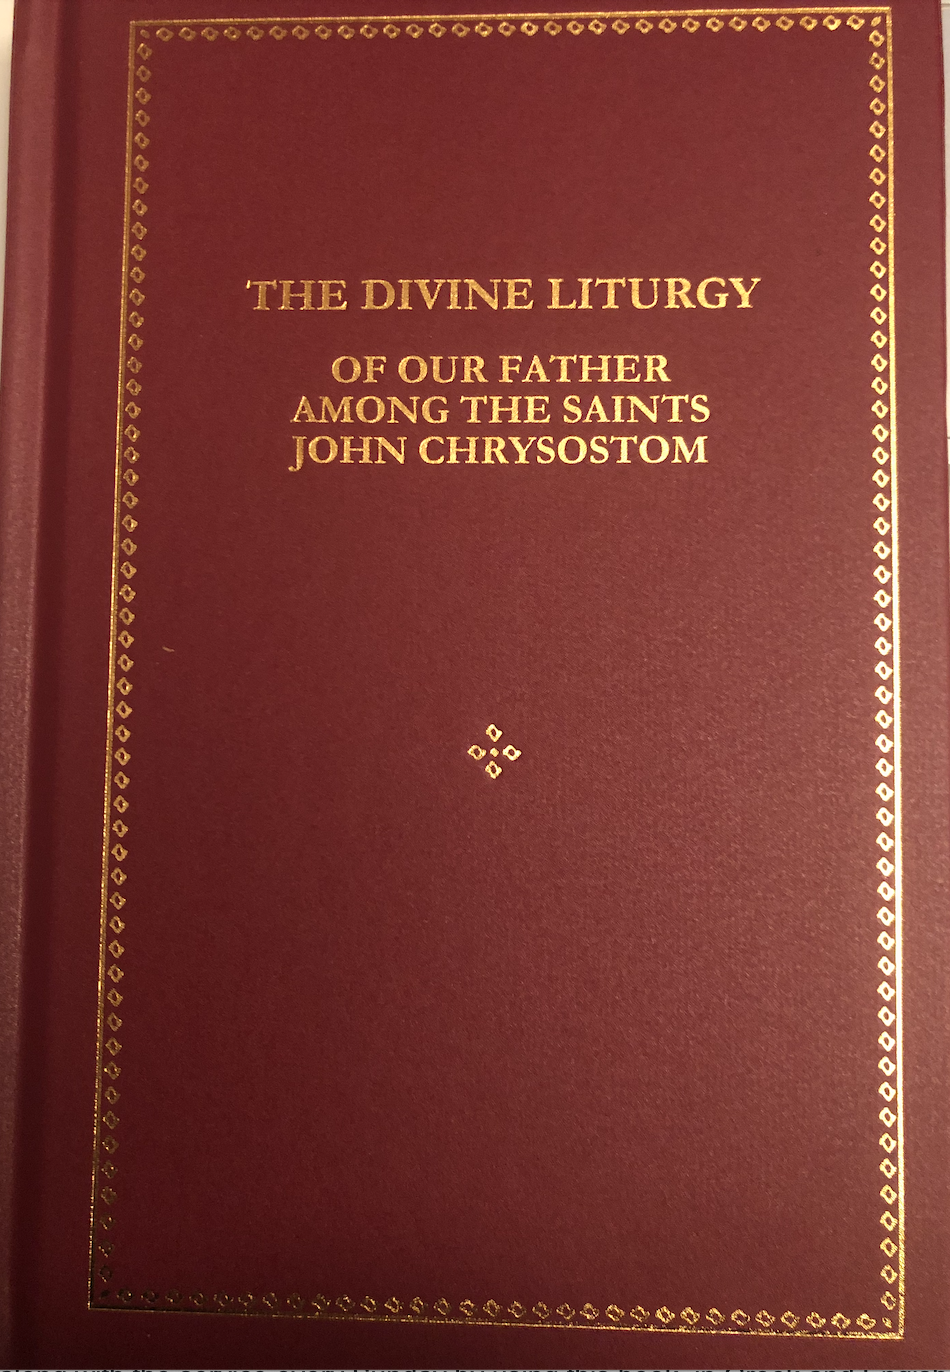 Book: Large format - The Divine Liturgy in Greek & English